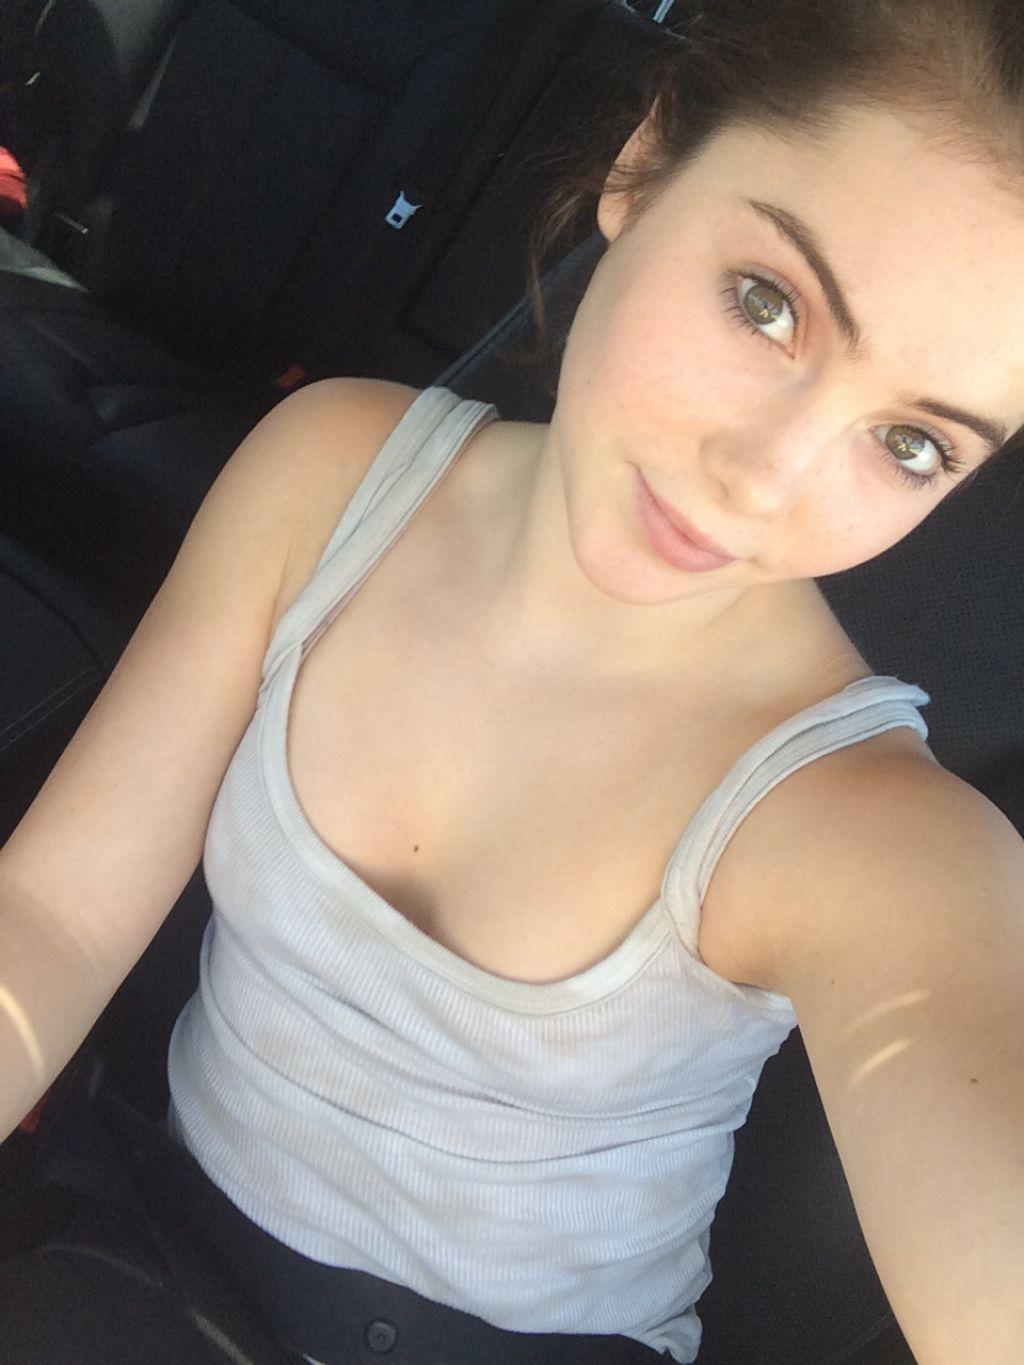 46 McKayla Maroney Nude Pictures That Are Sure To Put Her Under The Spotlight | Best Of Comic Books